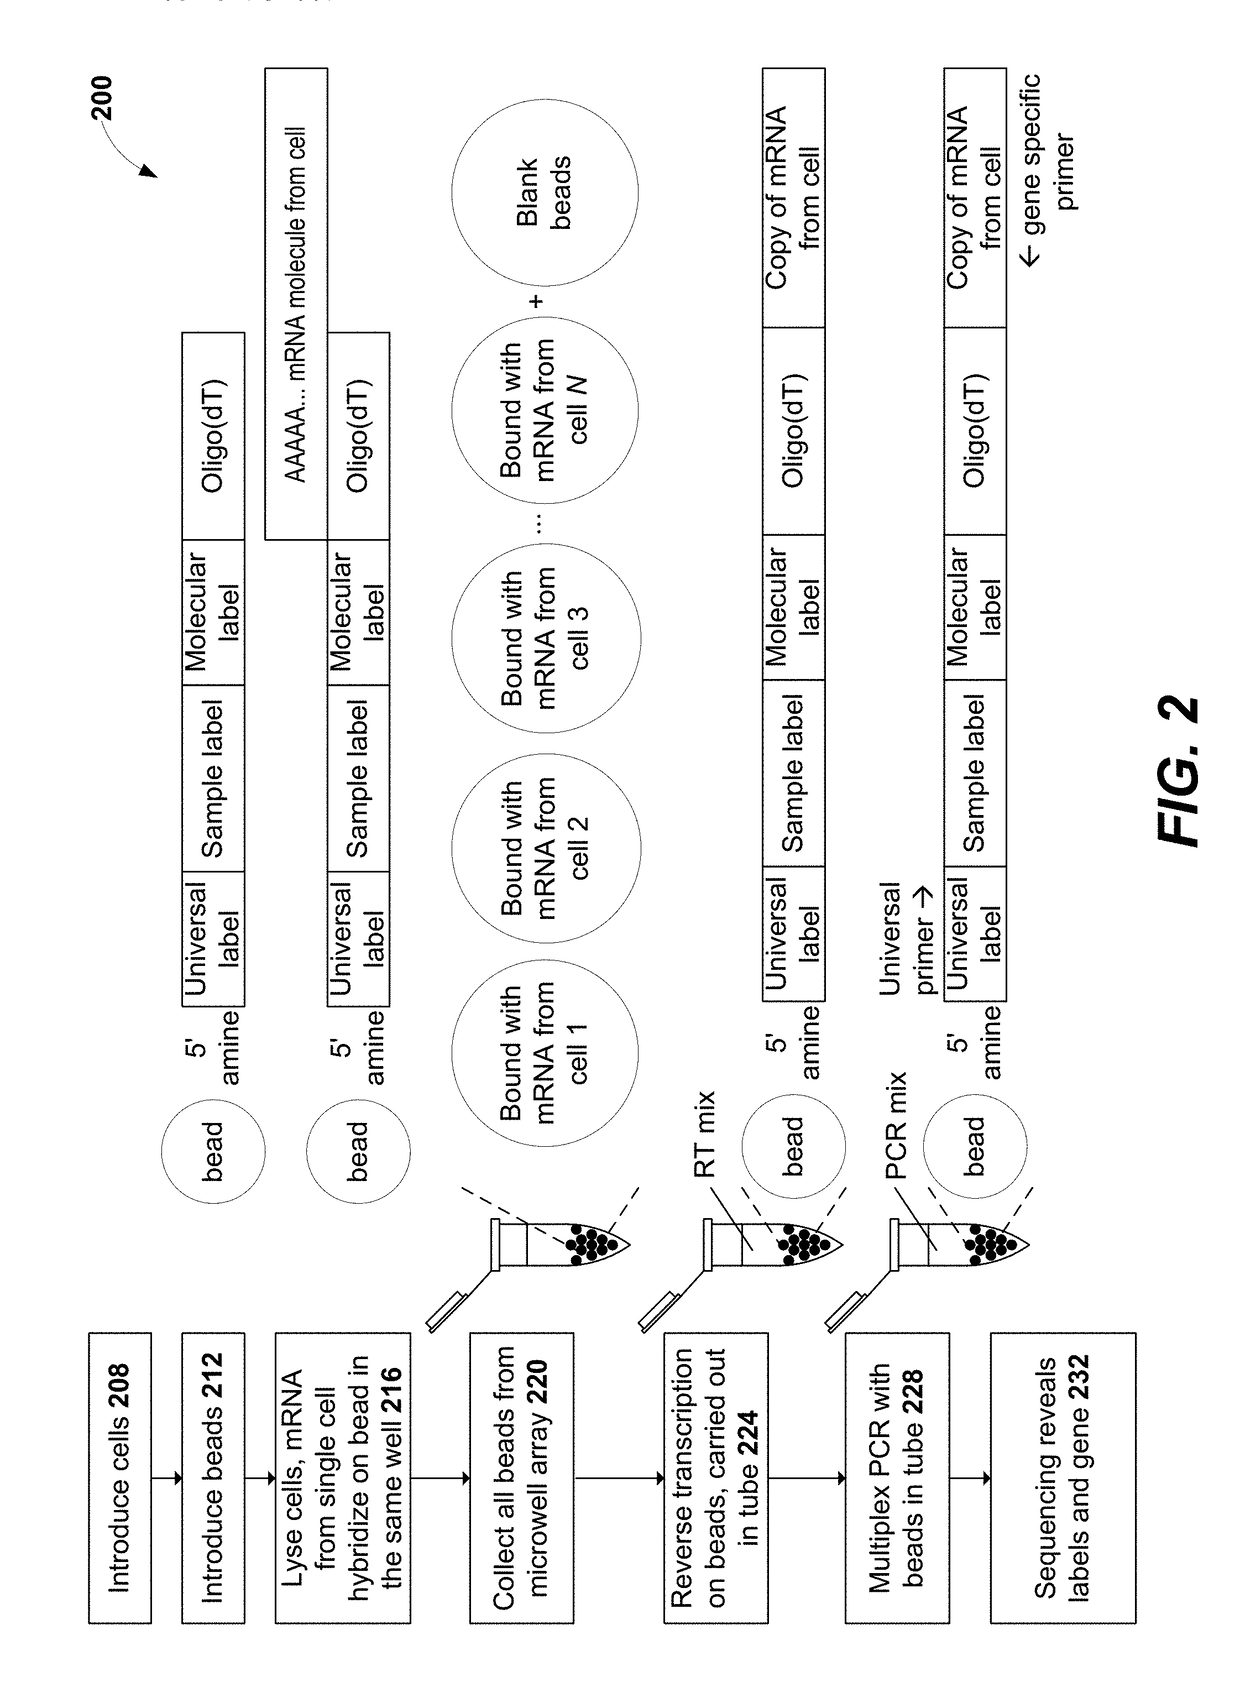 Methods for expression profile classification